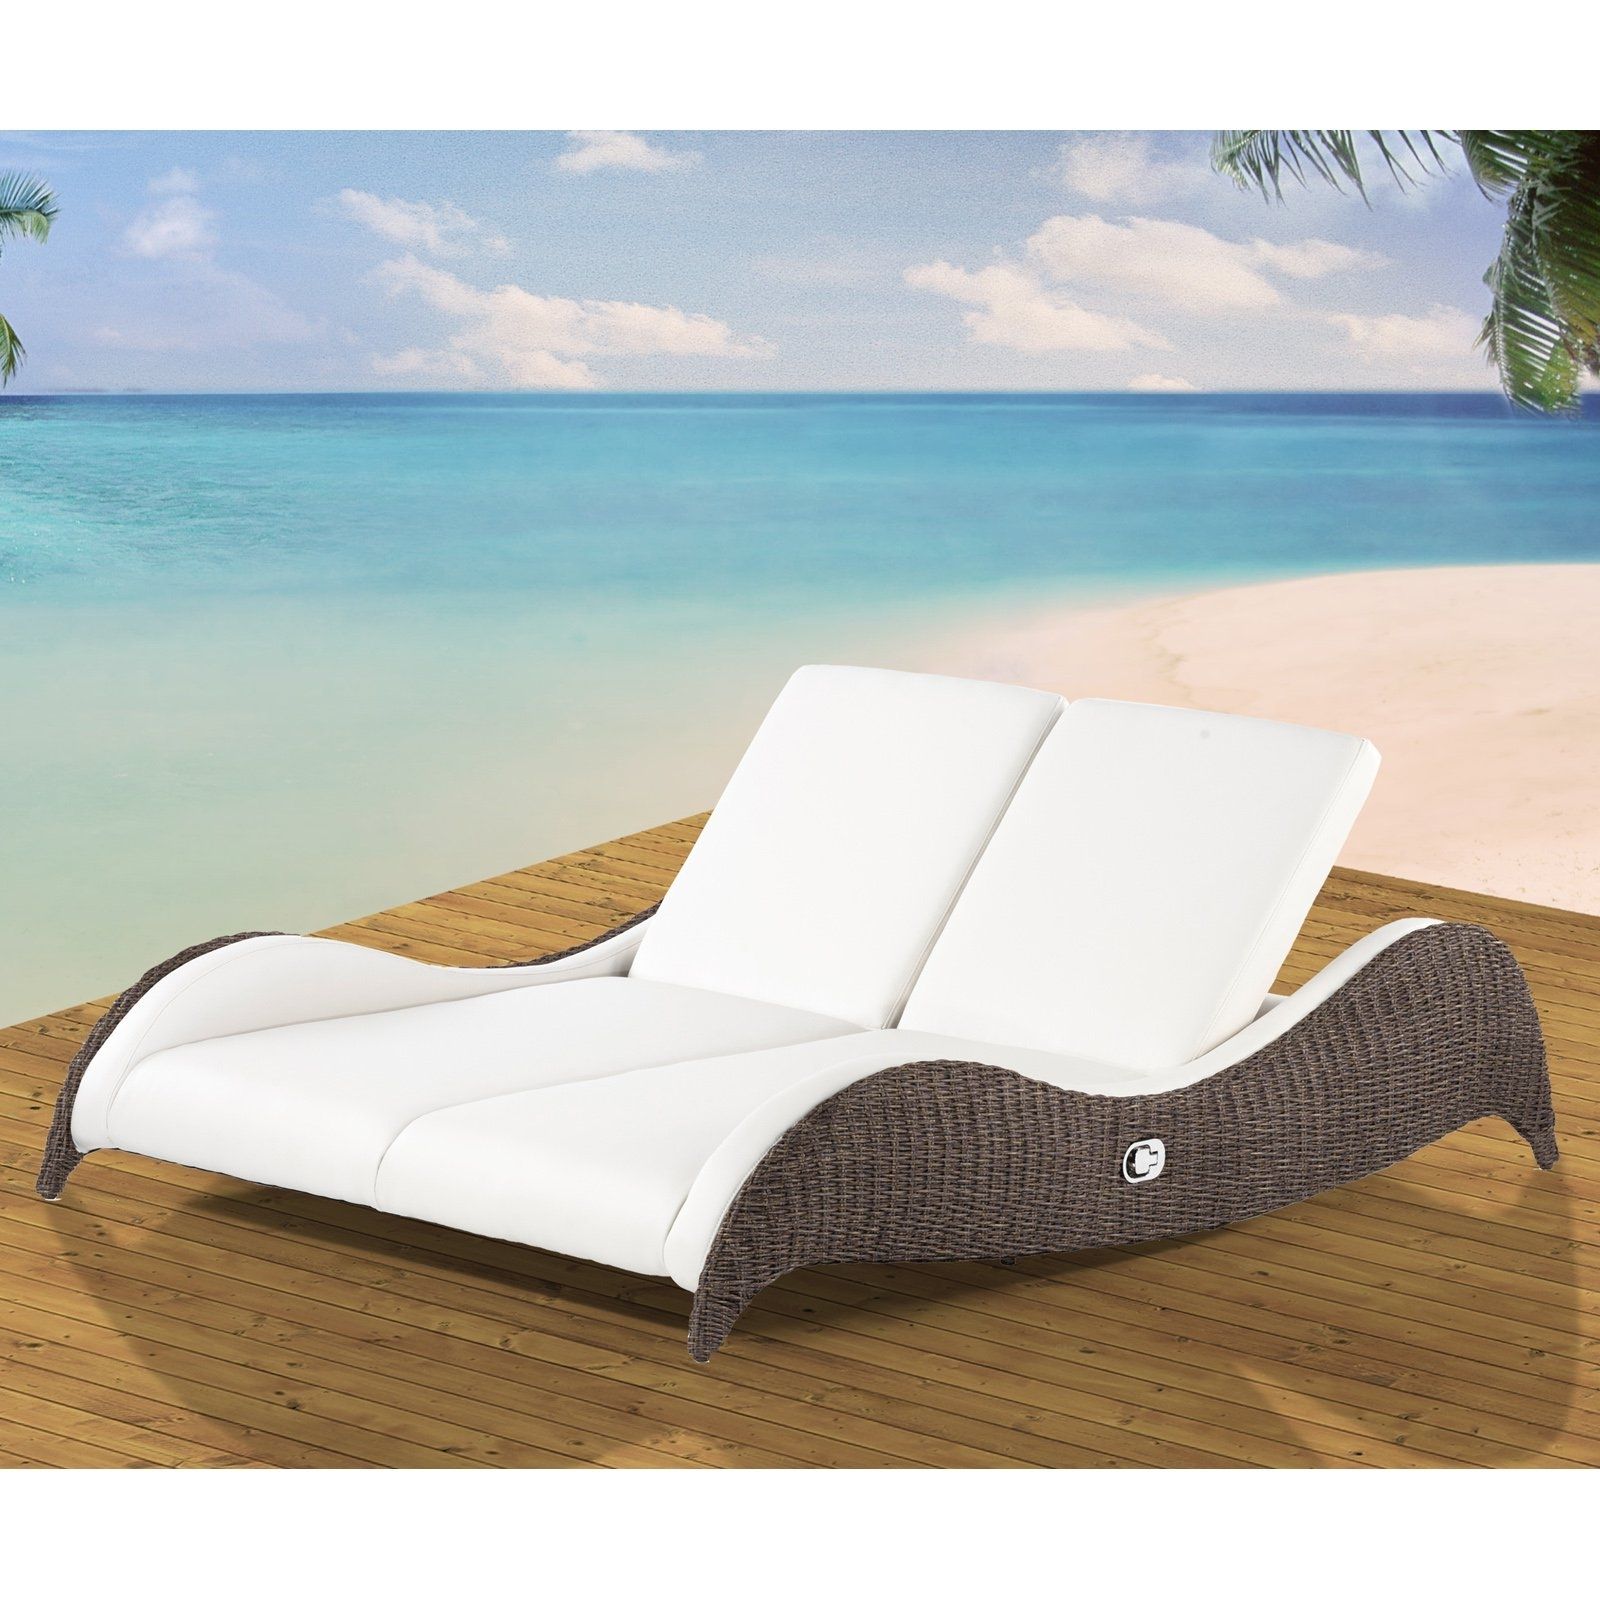 Outdoor : Plastic Lounge Chairs Lowes Outdoor Chaise Lounge Within Well Known Modern Outdoor Chaise Lounge Chairs (View 5 of 15)